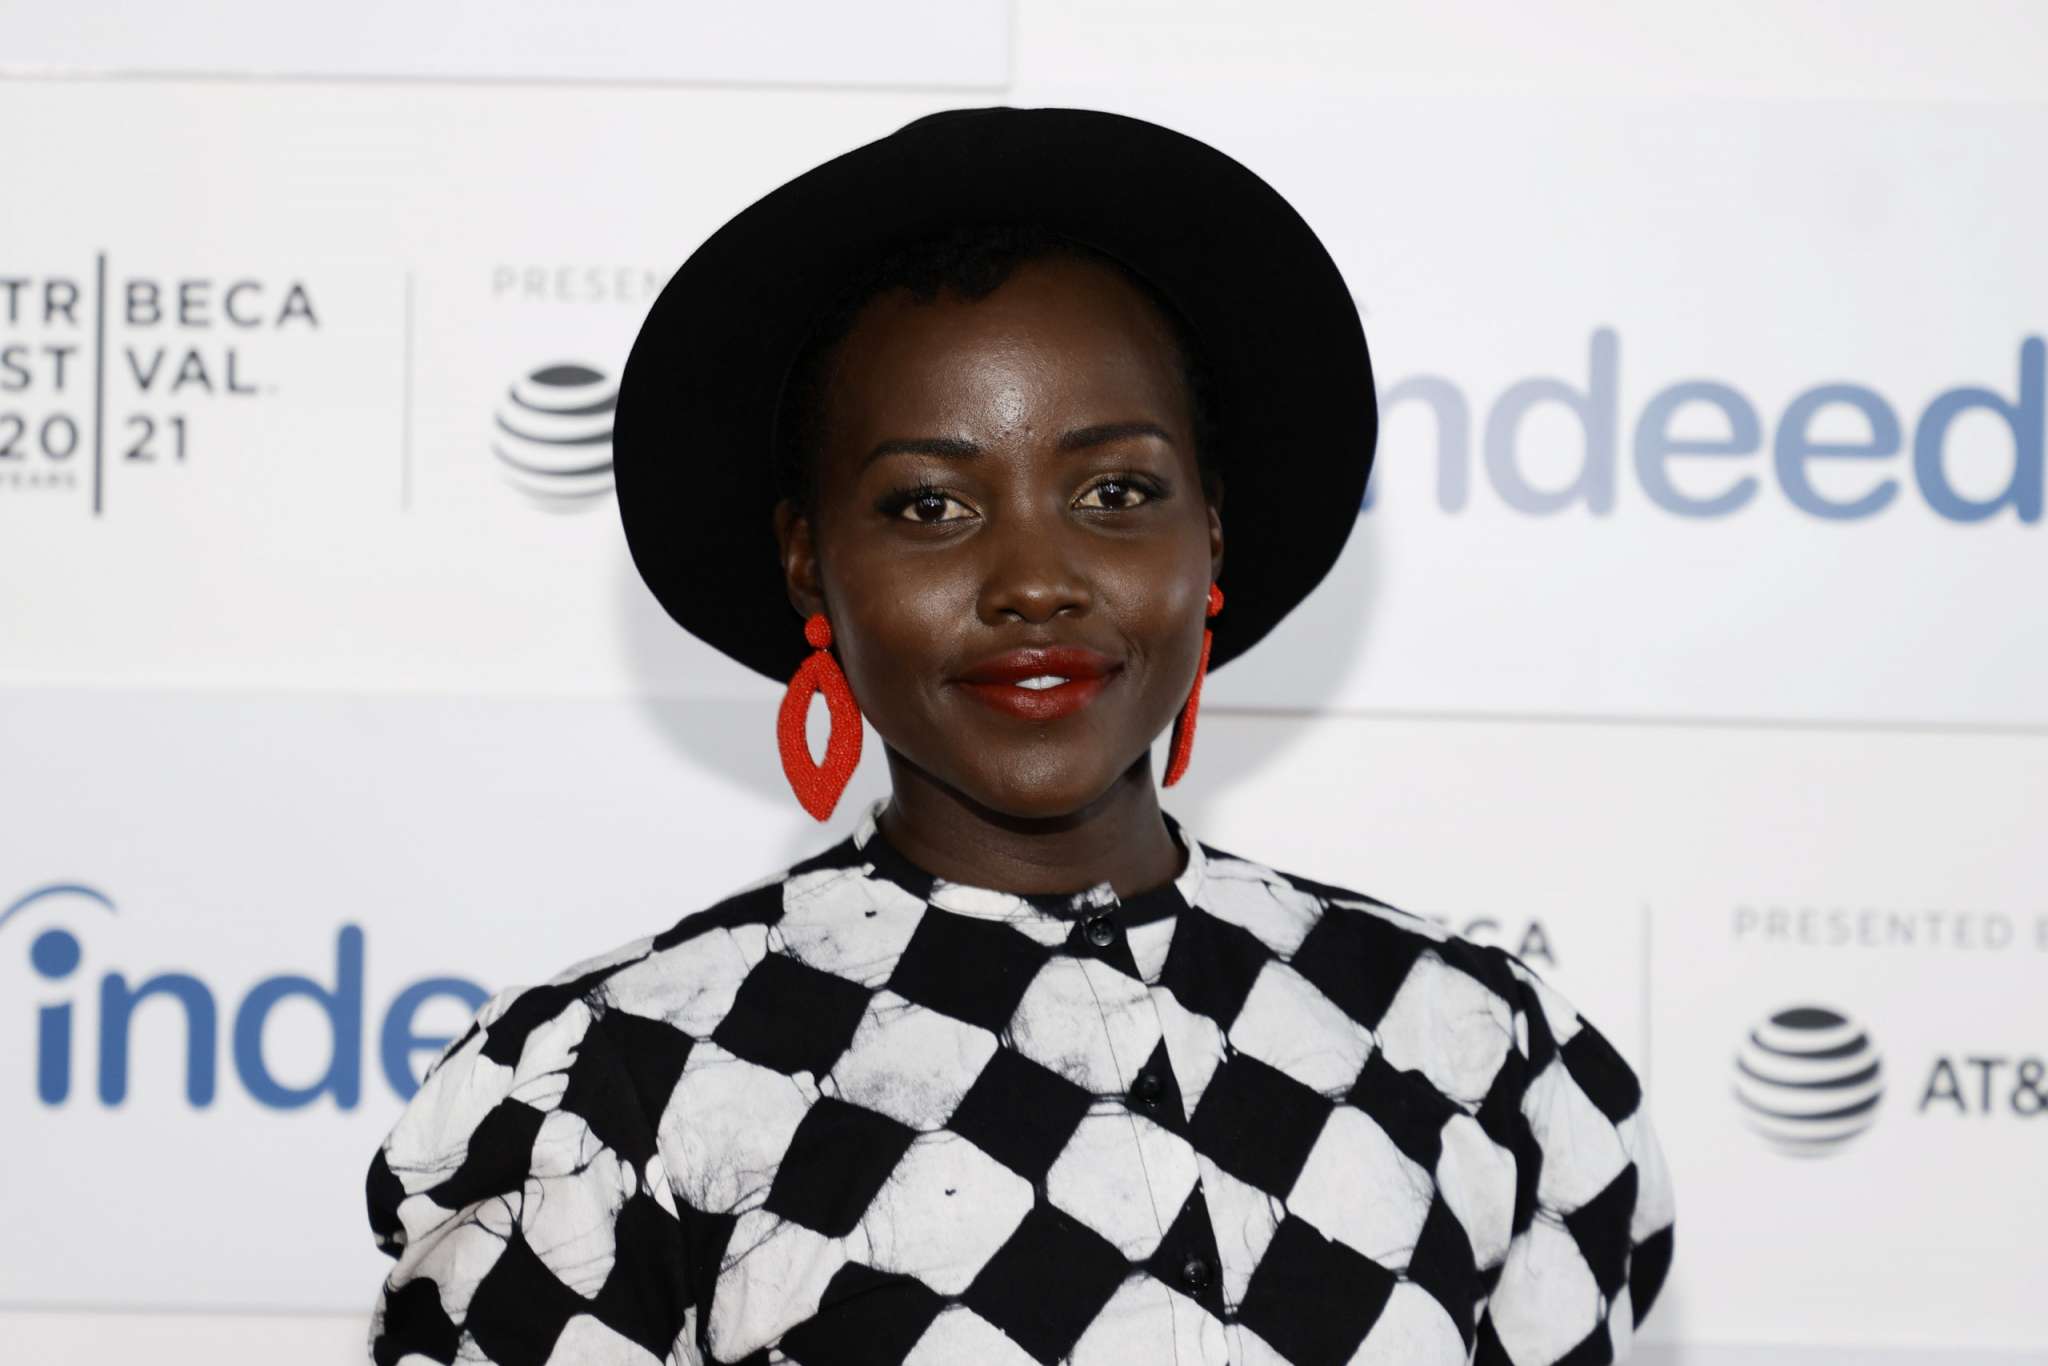 ”lupita-nyongo-dances-in-cute-video-on-instagram-shows-off-incredible-beach-body”